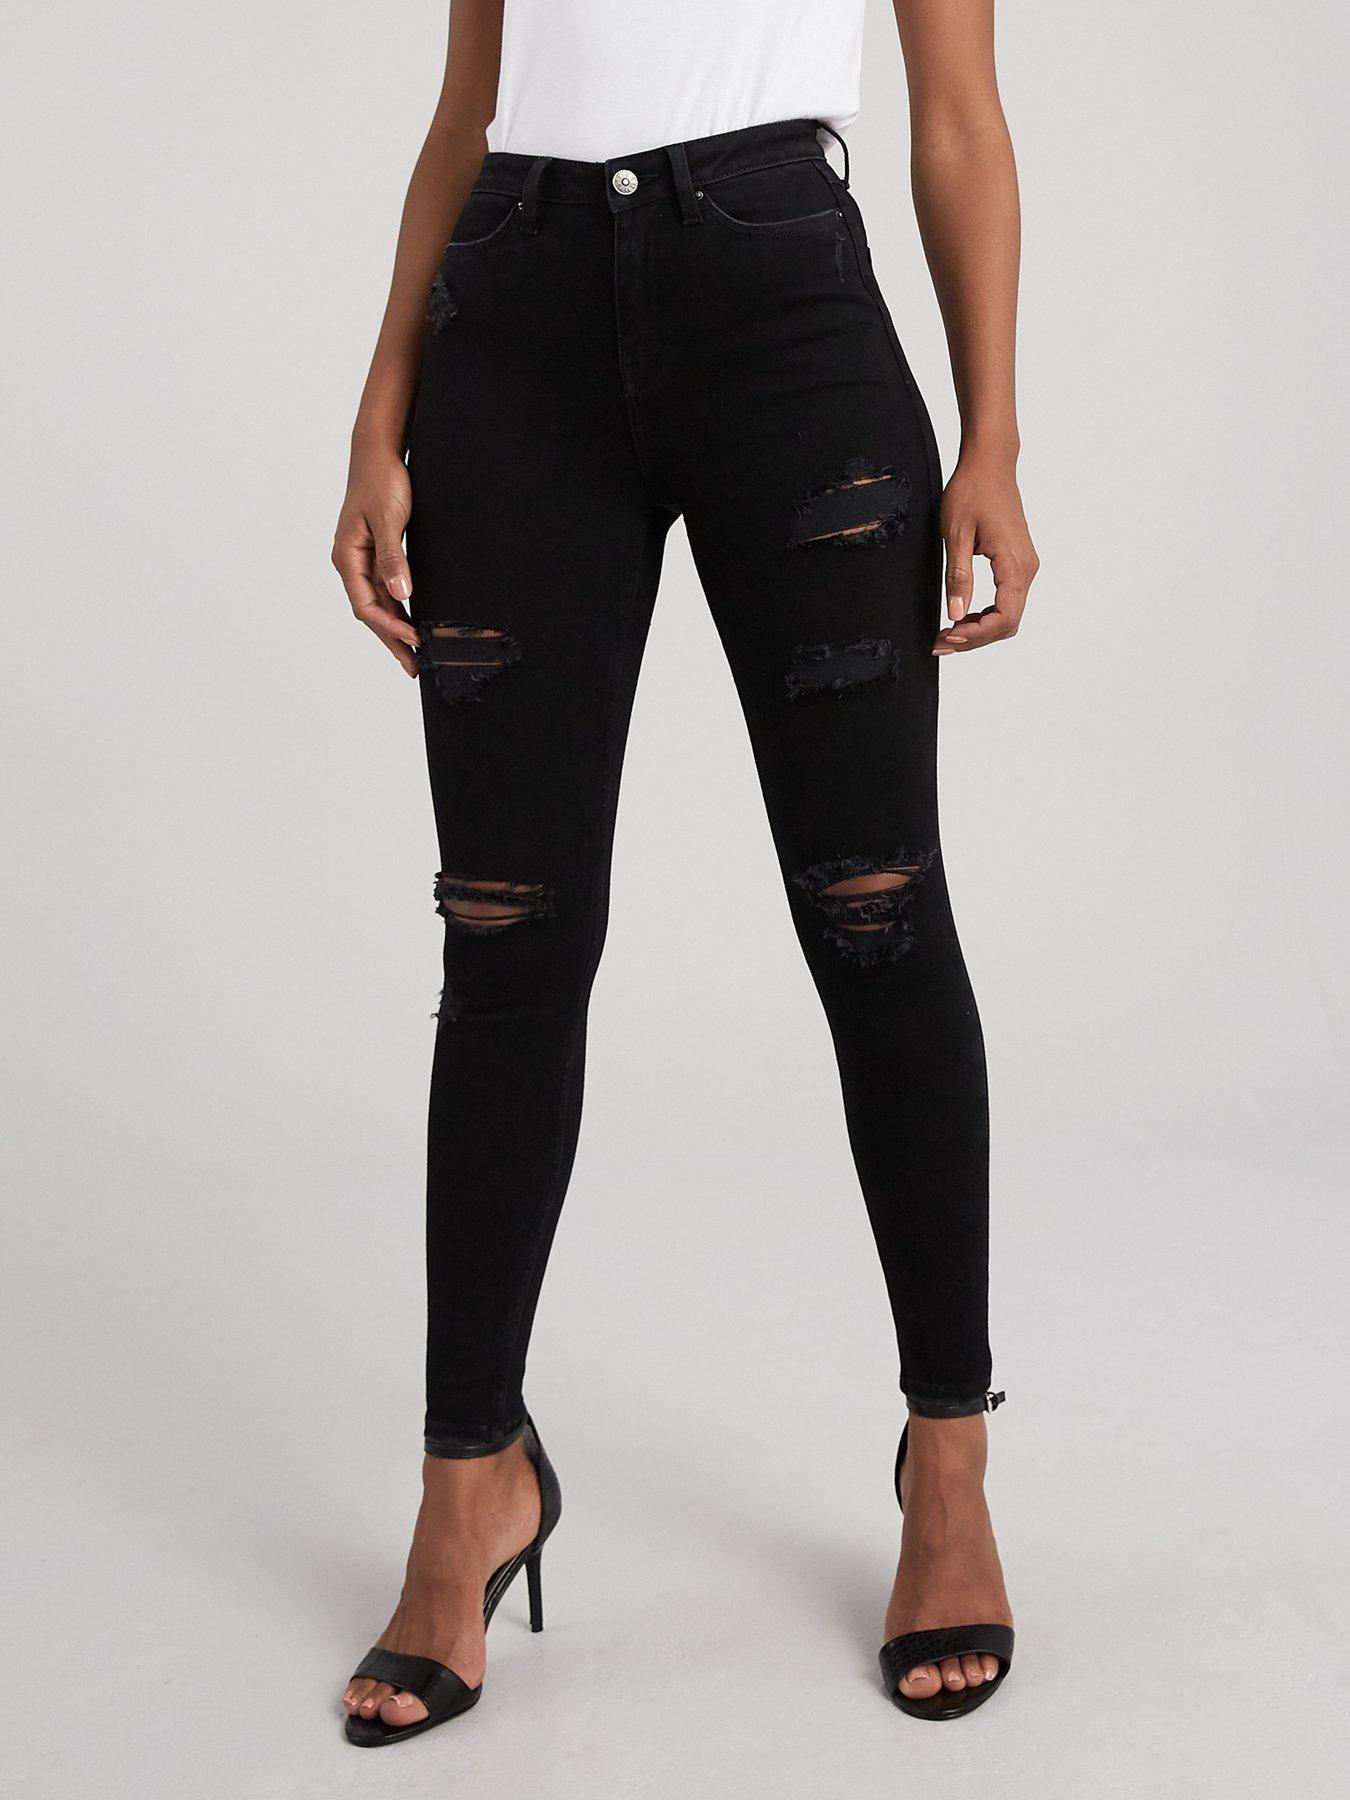 black ripped jeans front and back